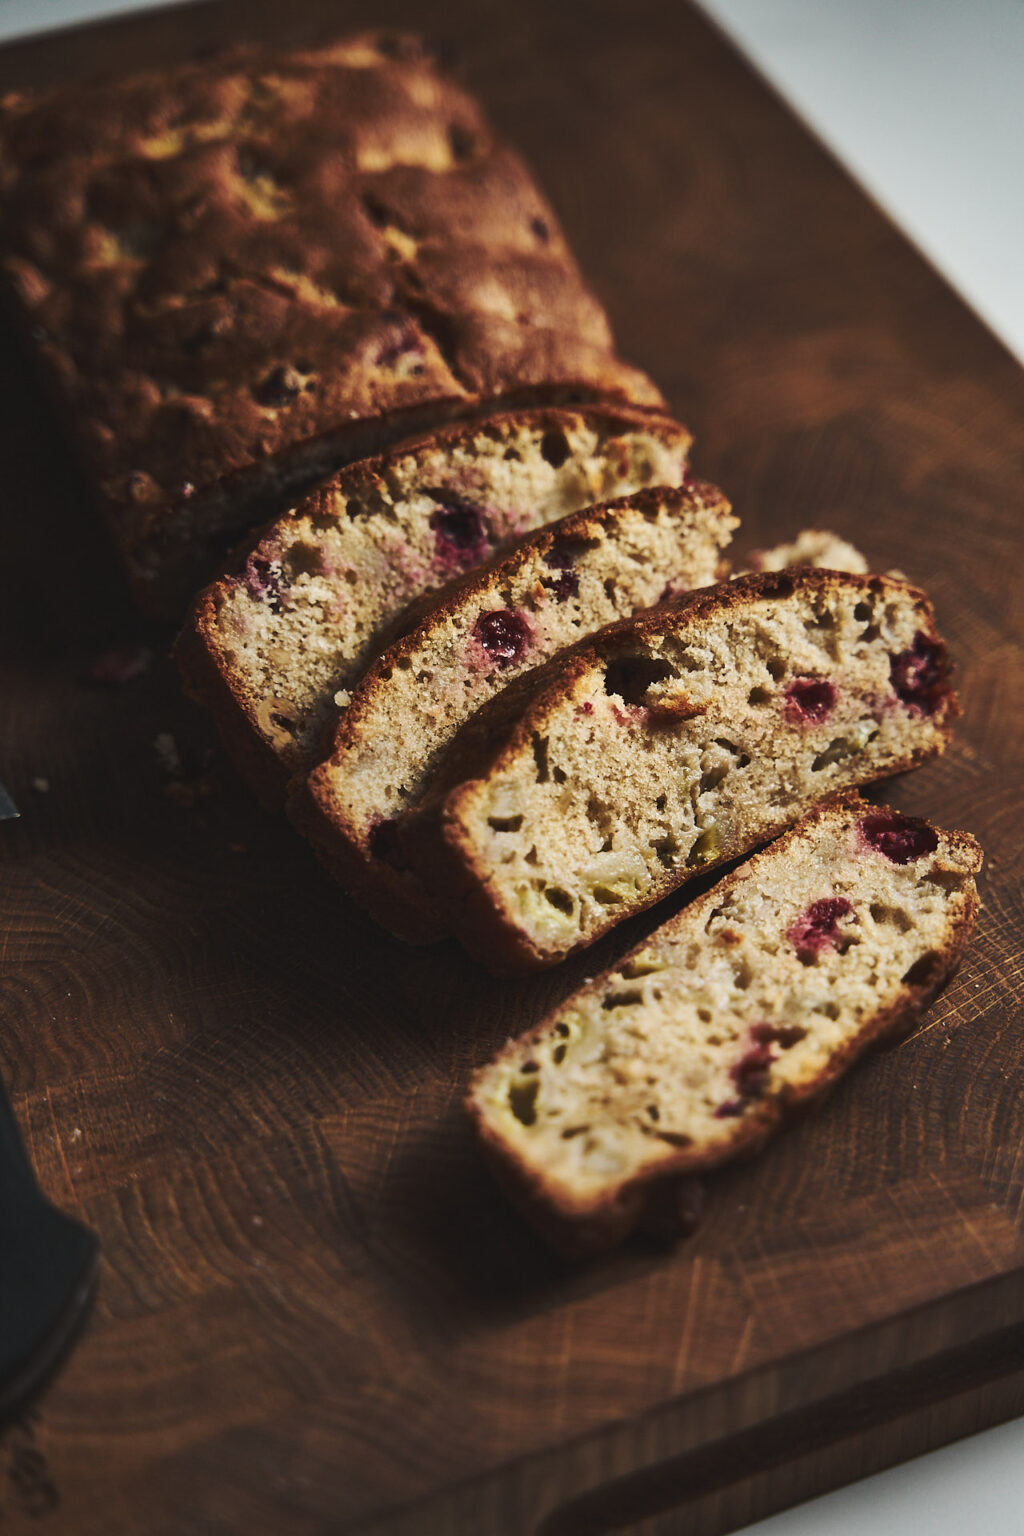 Banana bread with cranberries and walnuts